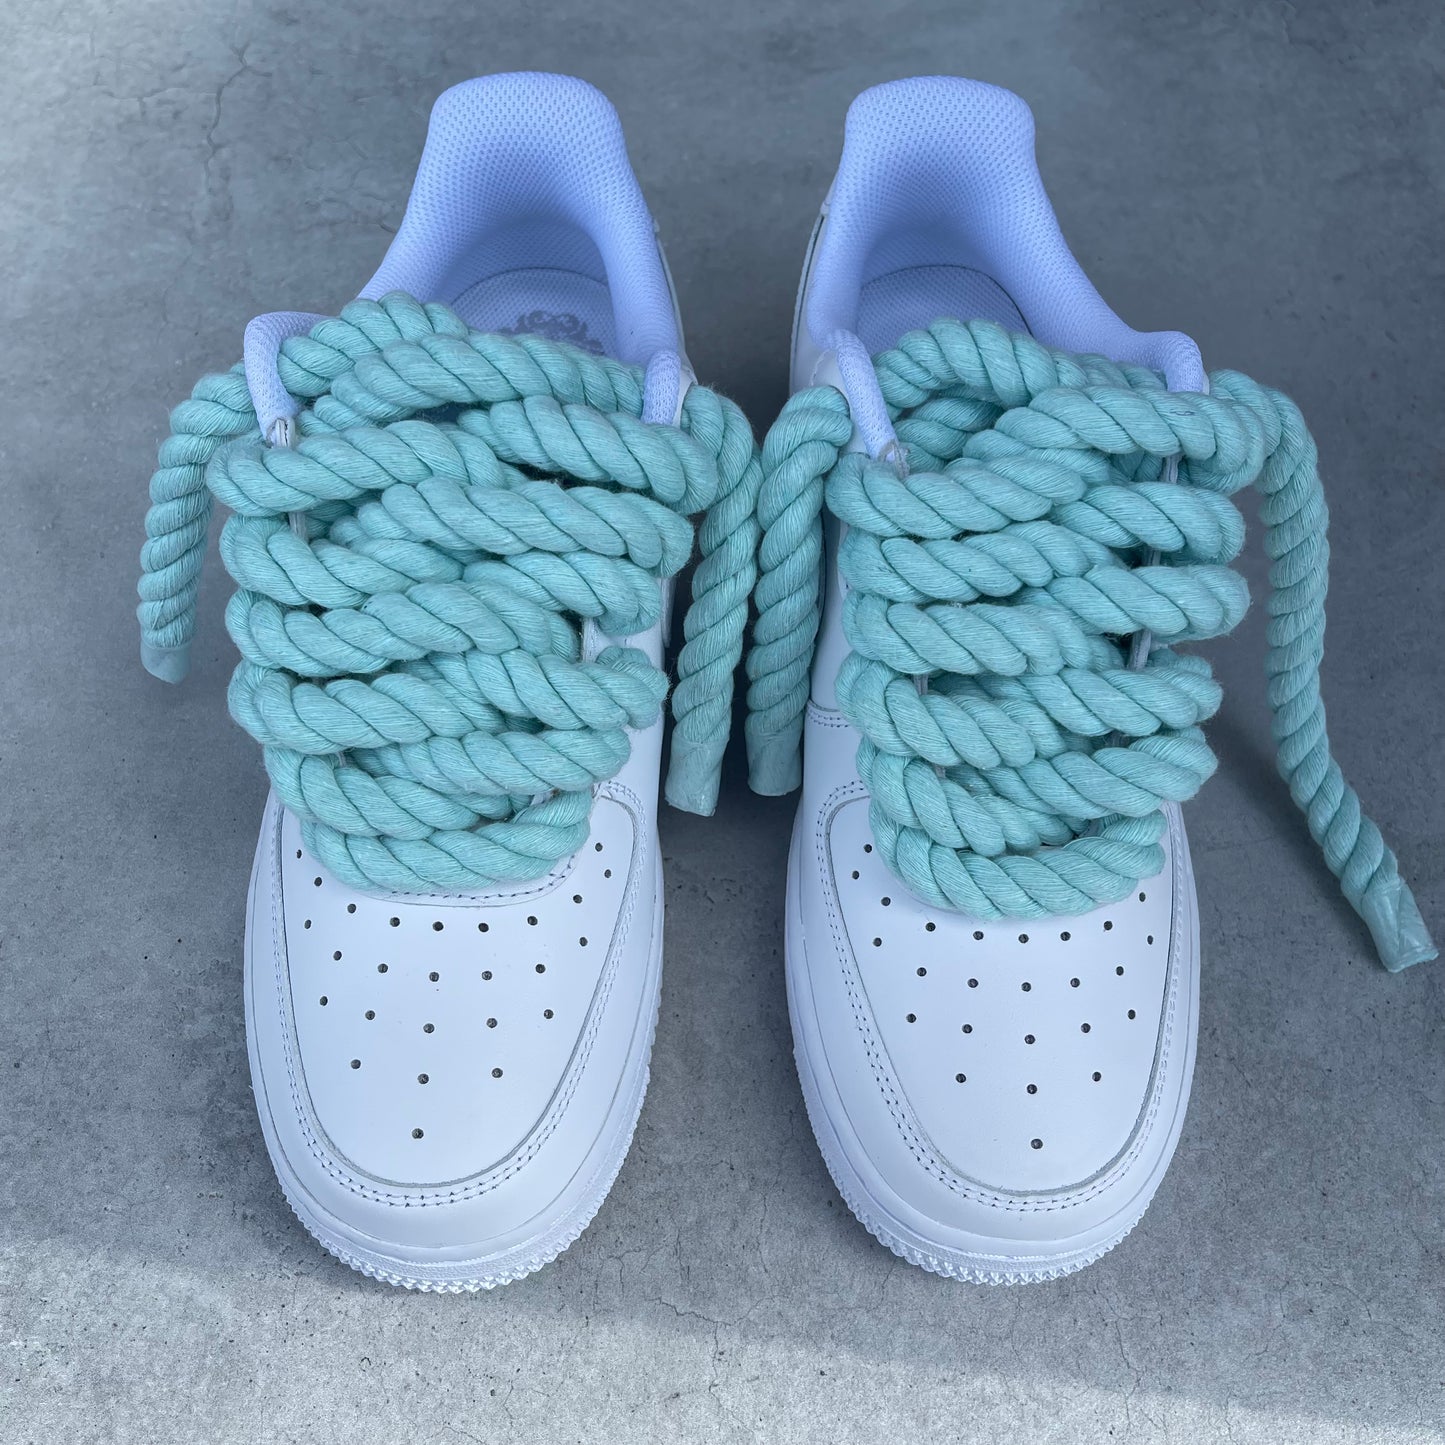 Custom AIR FORCE 1 - Rope laces (mint)